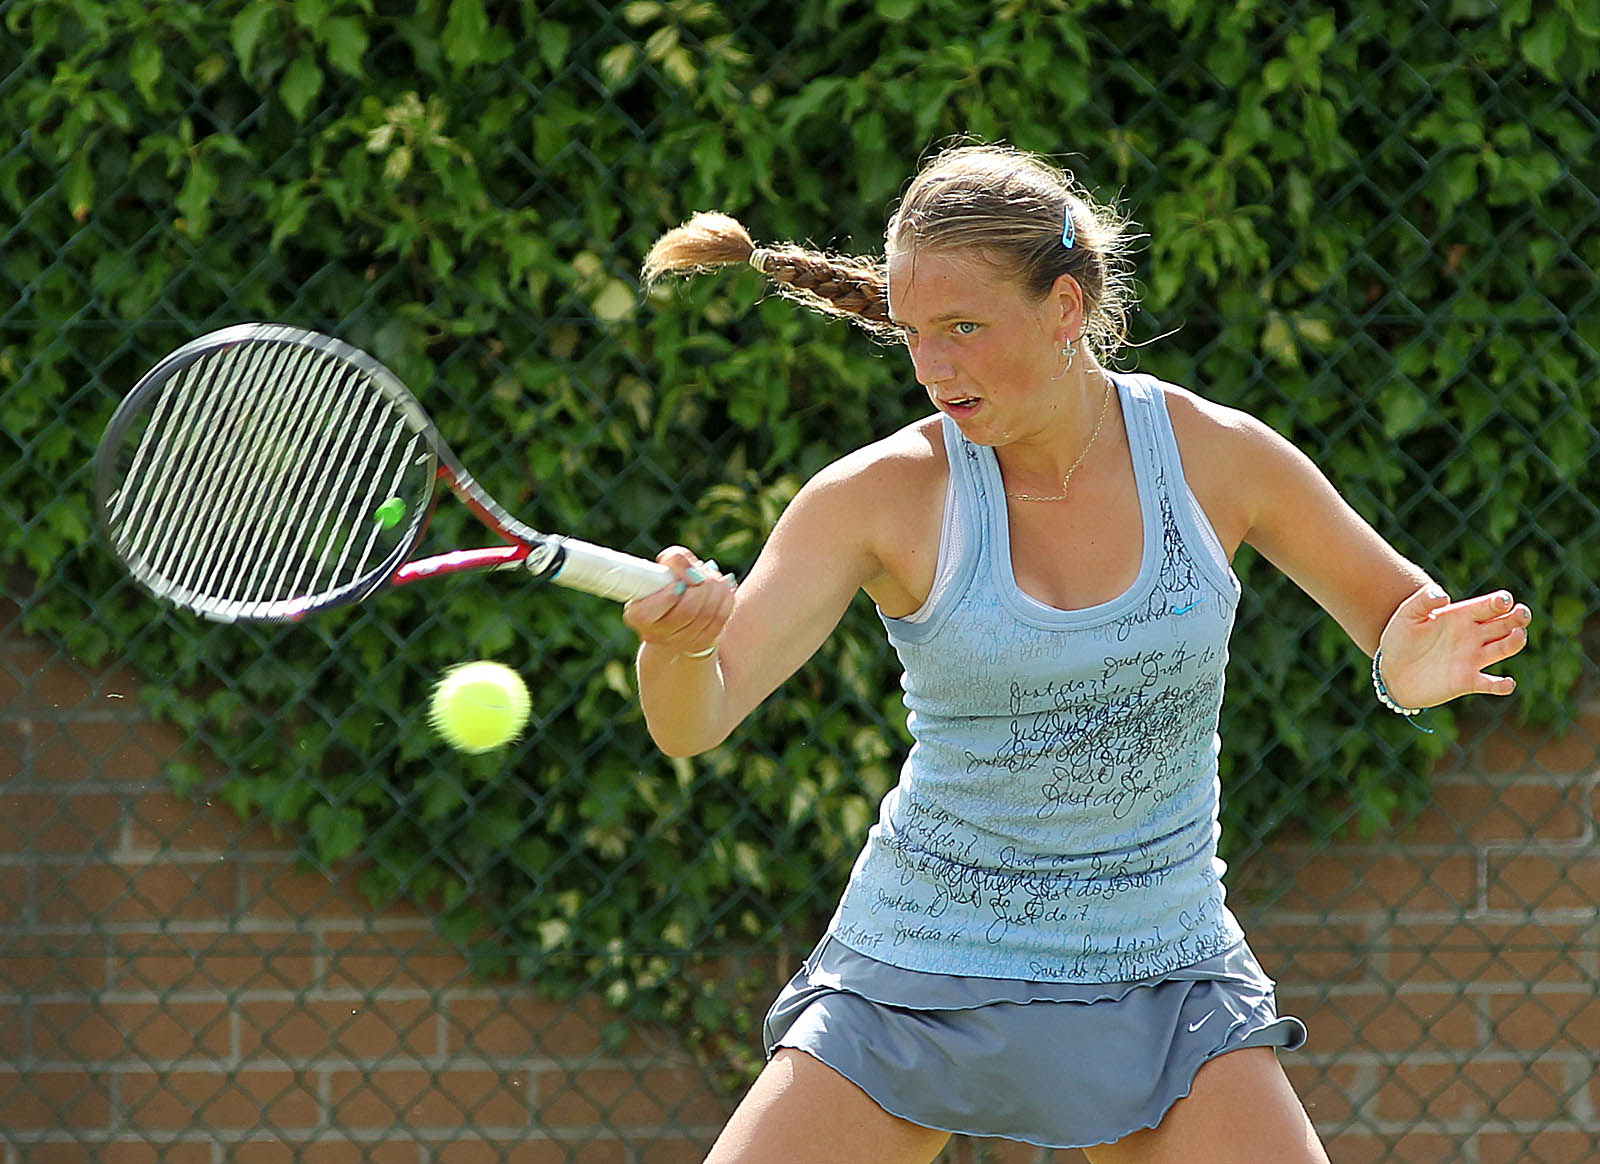 a woman hits a tennis ball on the court